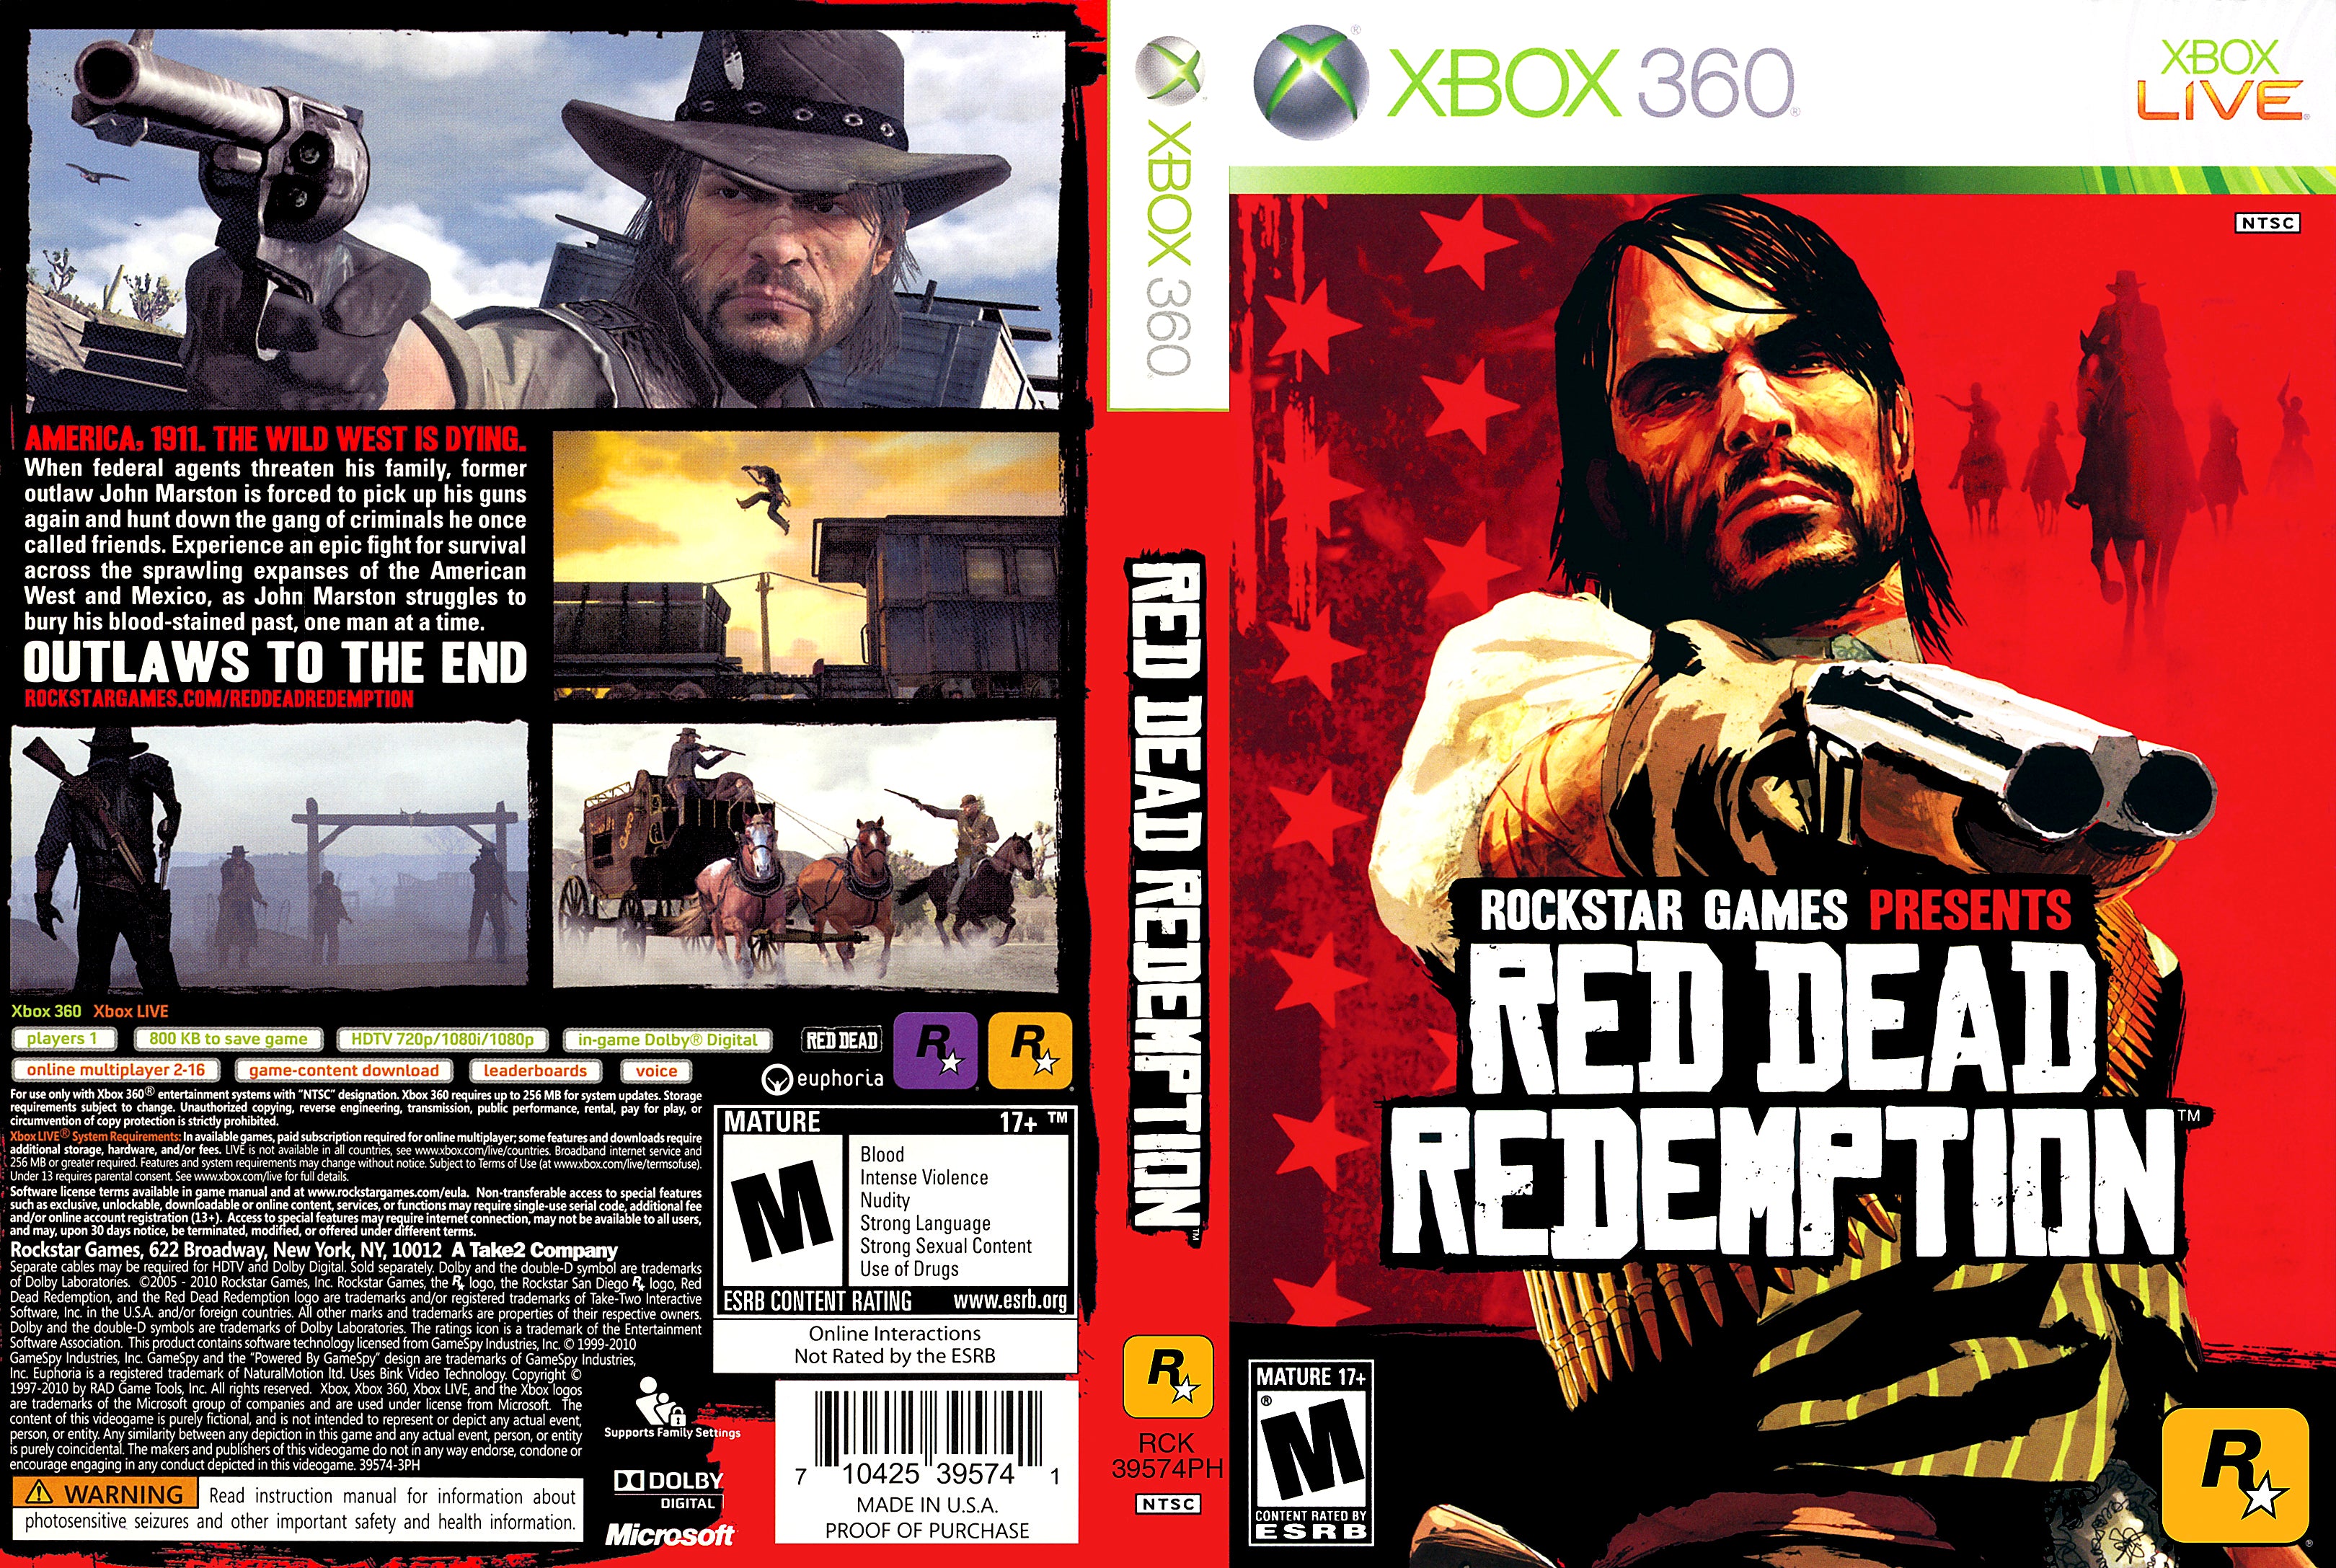 Red Dead Redemption - Xbox 360